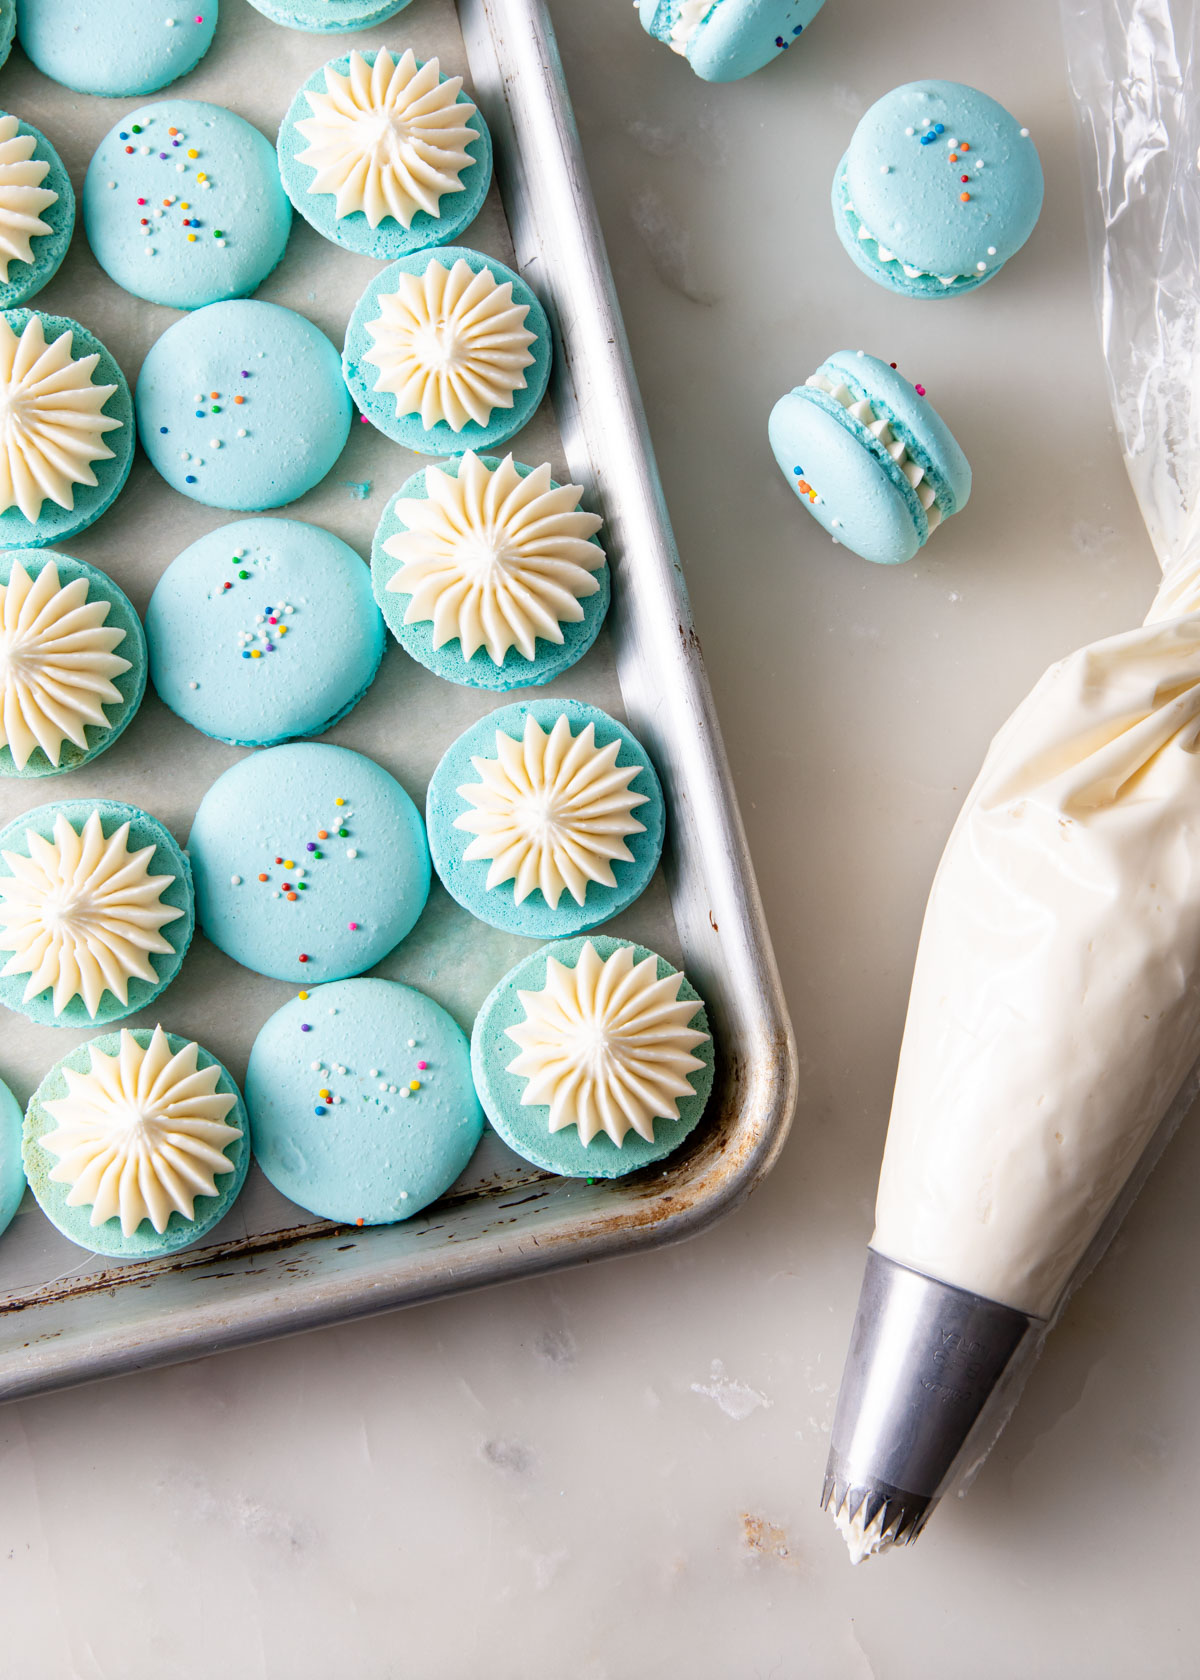 Piping vanilla frosting onto French macarons